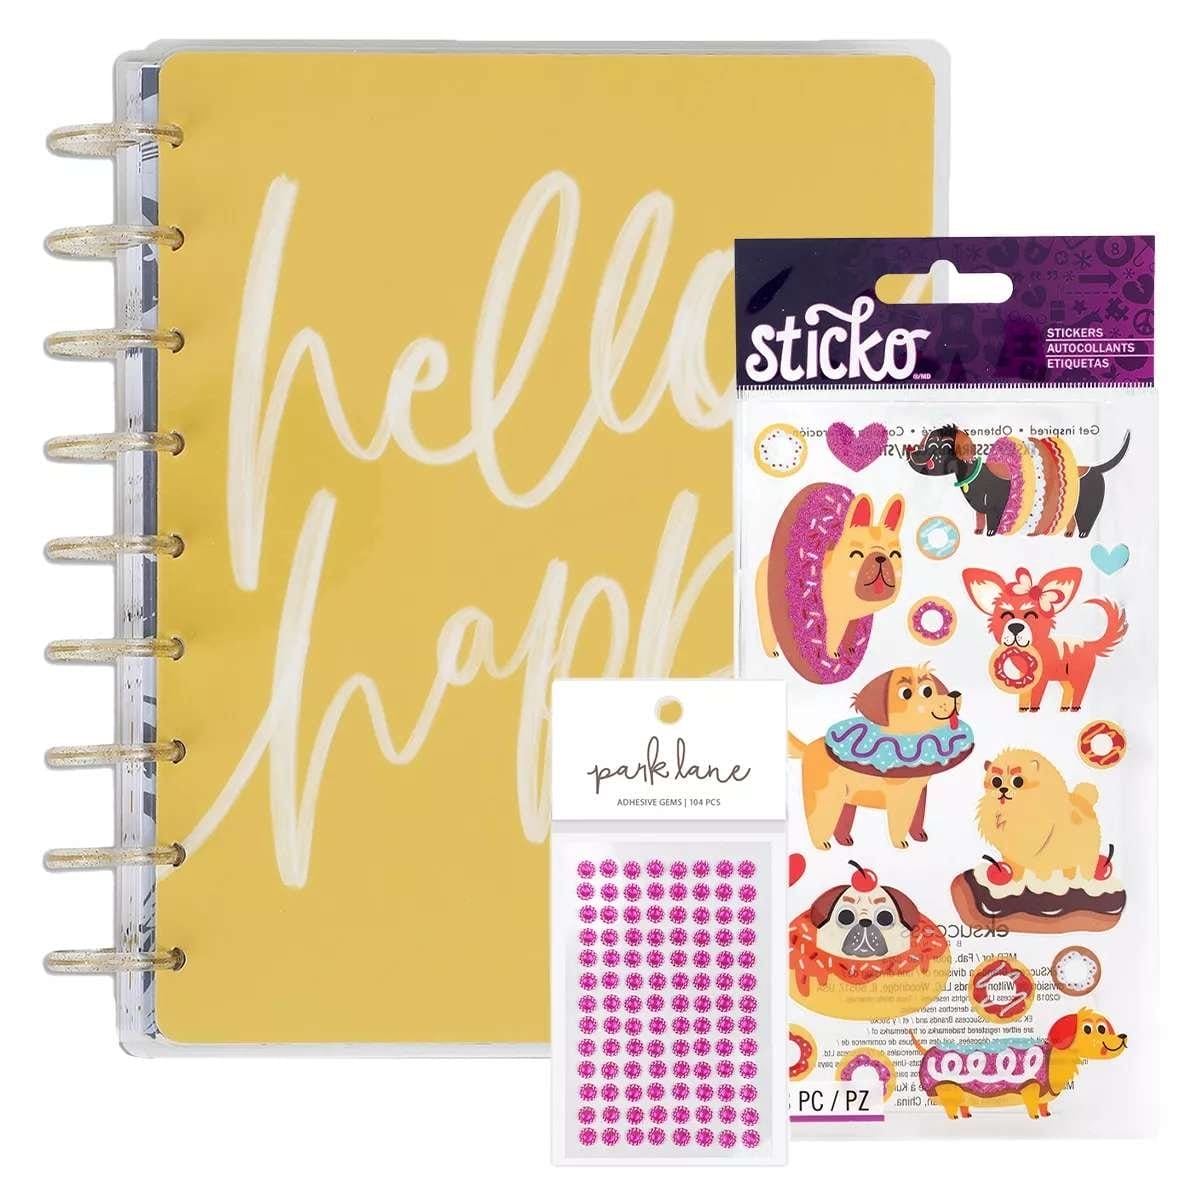 Happy Planner, Papercrafting Embellishments and Stickers.